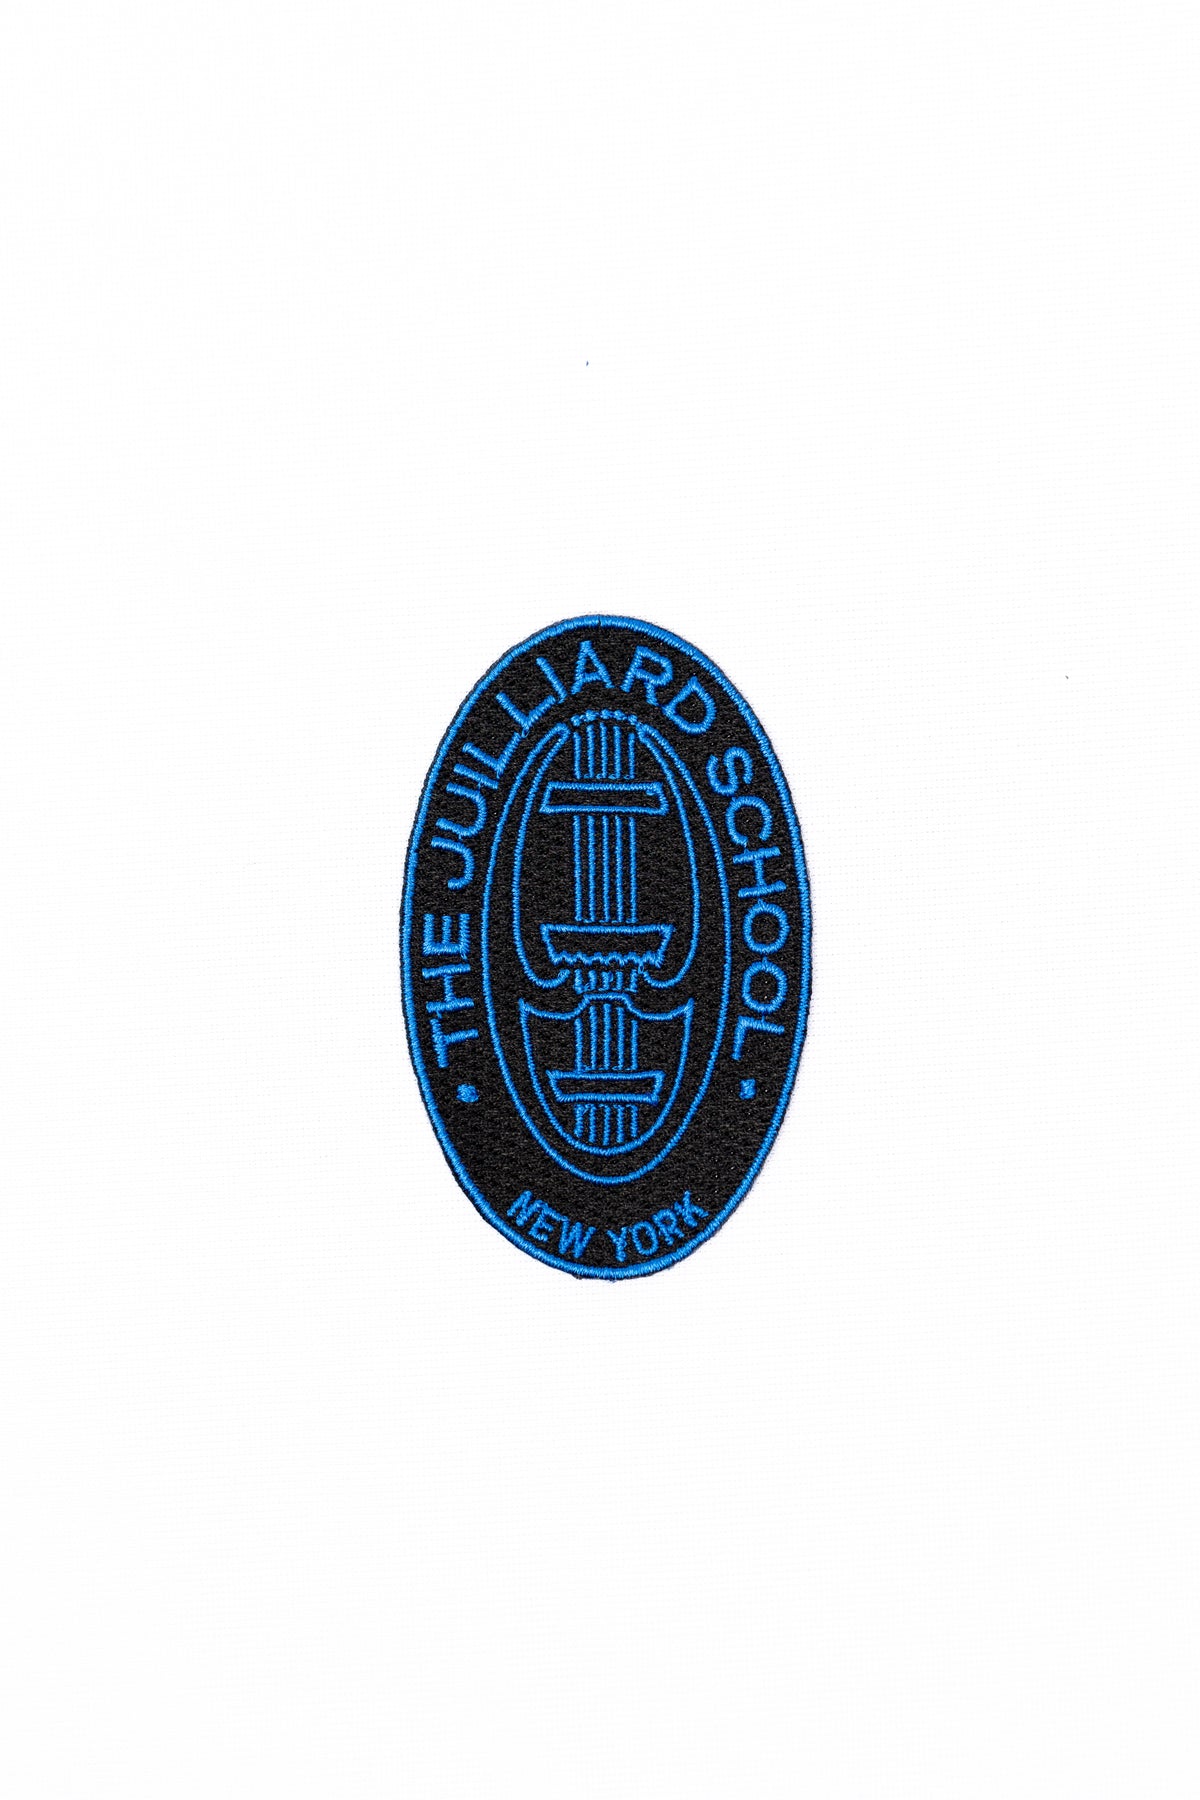 Embroidered Patch/Emblem: Seal logo for sewing on cases/backpacks